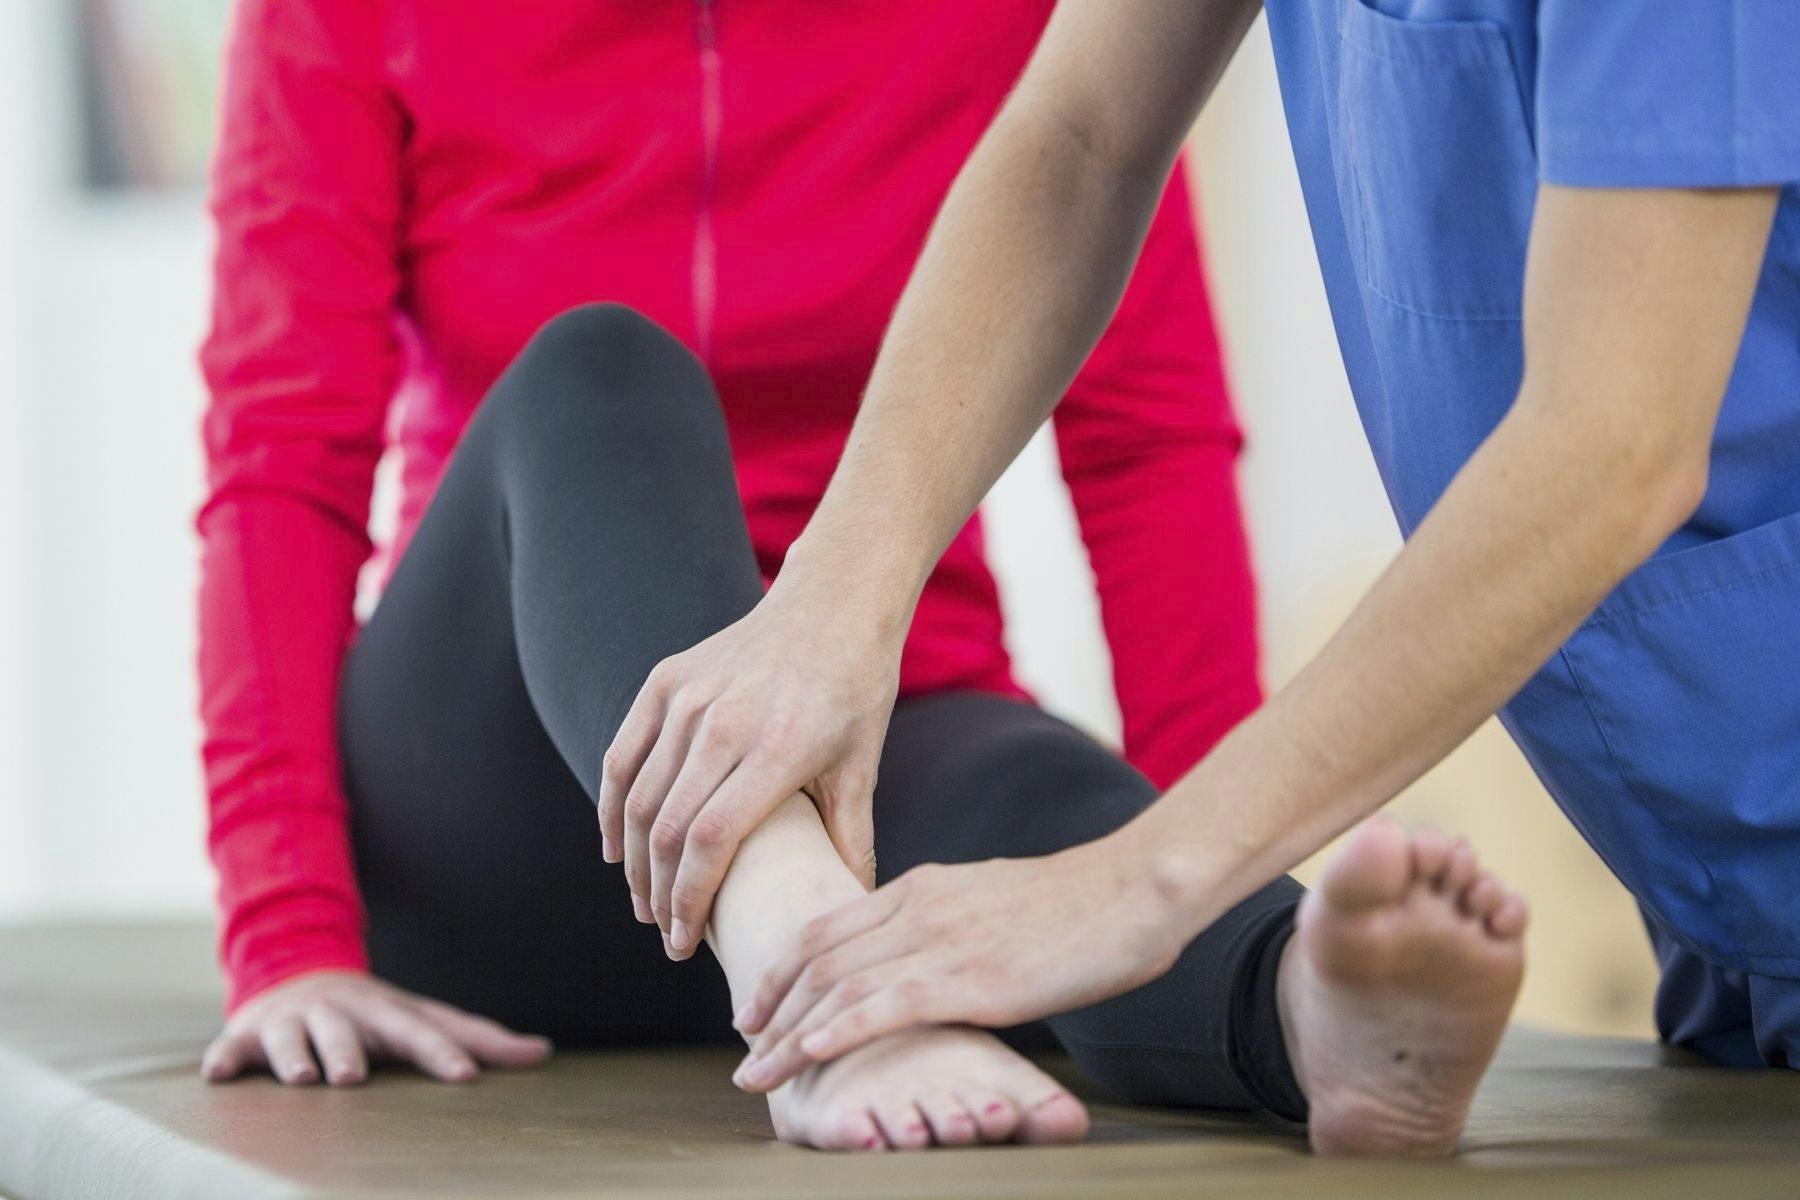 physical therapy for an ankle injury atlantis physical therapy torrance redondo beach south bay